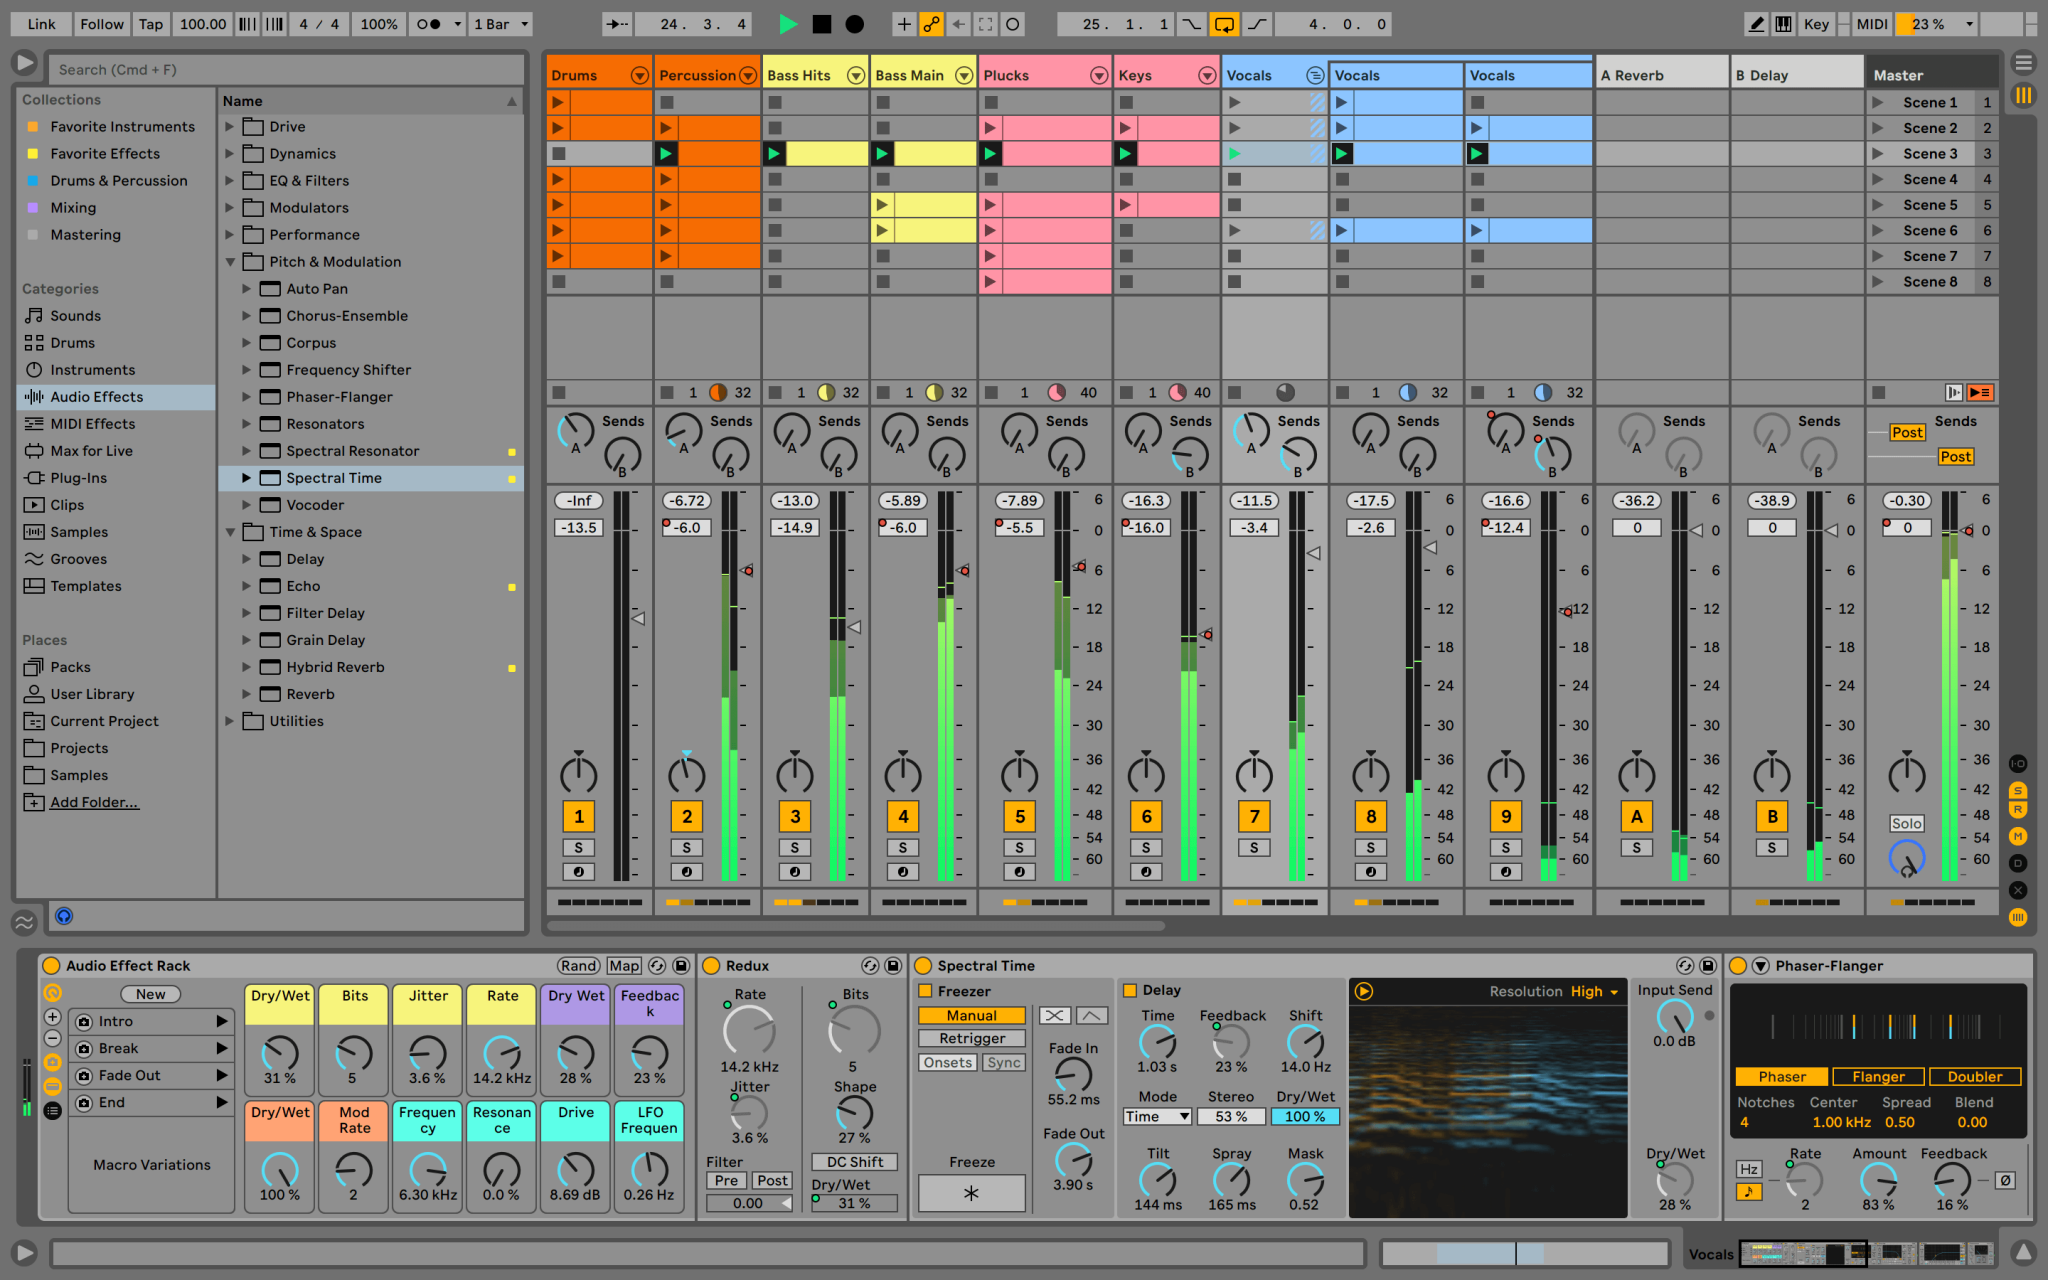 ableton software free download full version